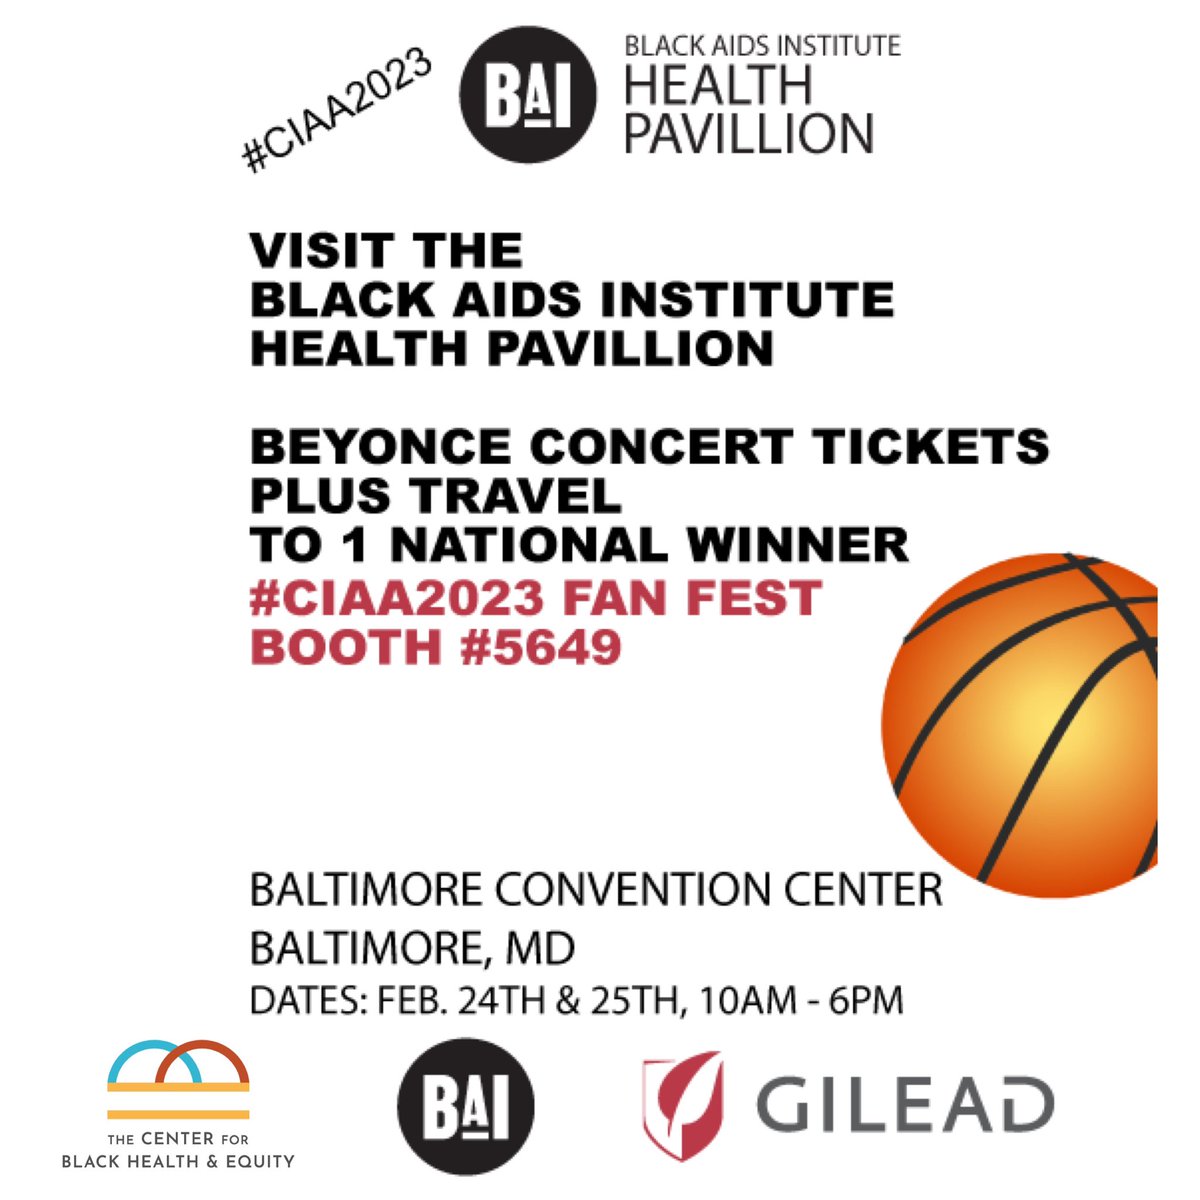 Check out @blackaids and @CenterforBH  at the #CIAA2023 #FanFest TODAY&TOMORROW; 10am-6pm!
Free Health Screenings by @UsHelpingUs #CIAA

#LoveIsTheMessage 
#OurProblemOurSolution #LetsStopHIVTogether #Health #BlackHealth #HealthScreenings #Awareness #HIVPrevention